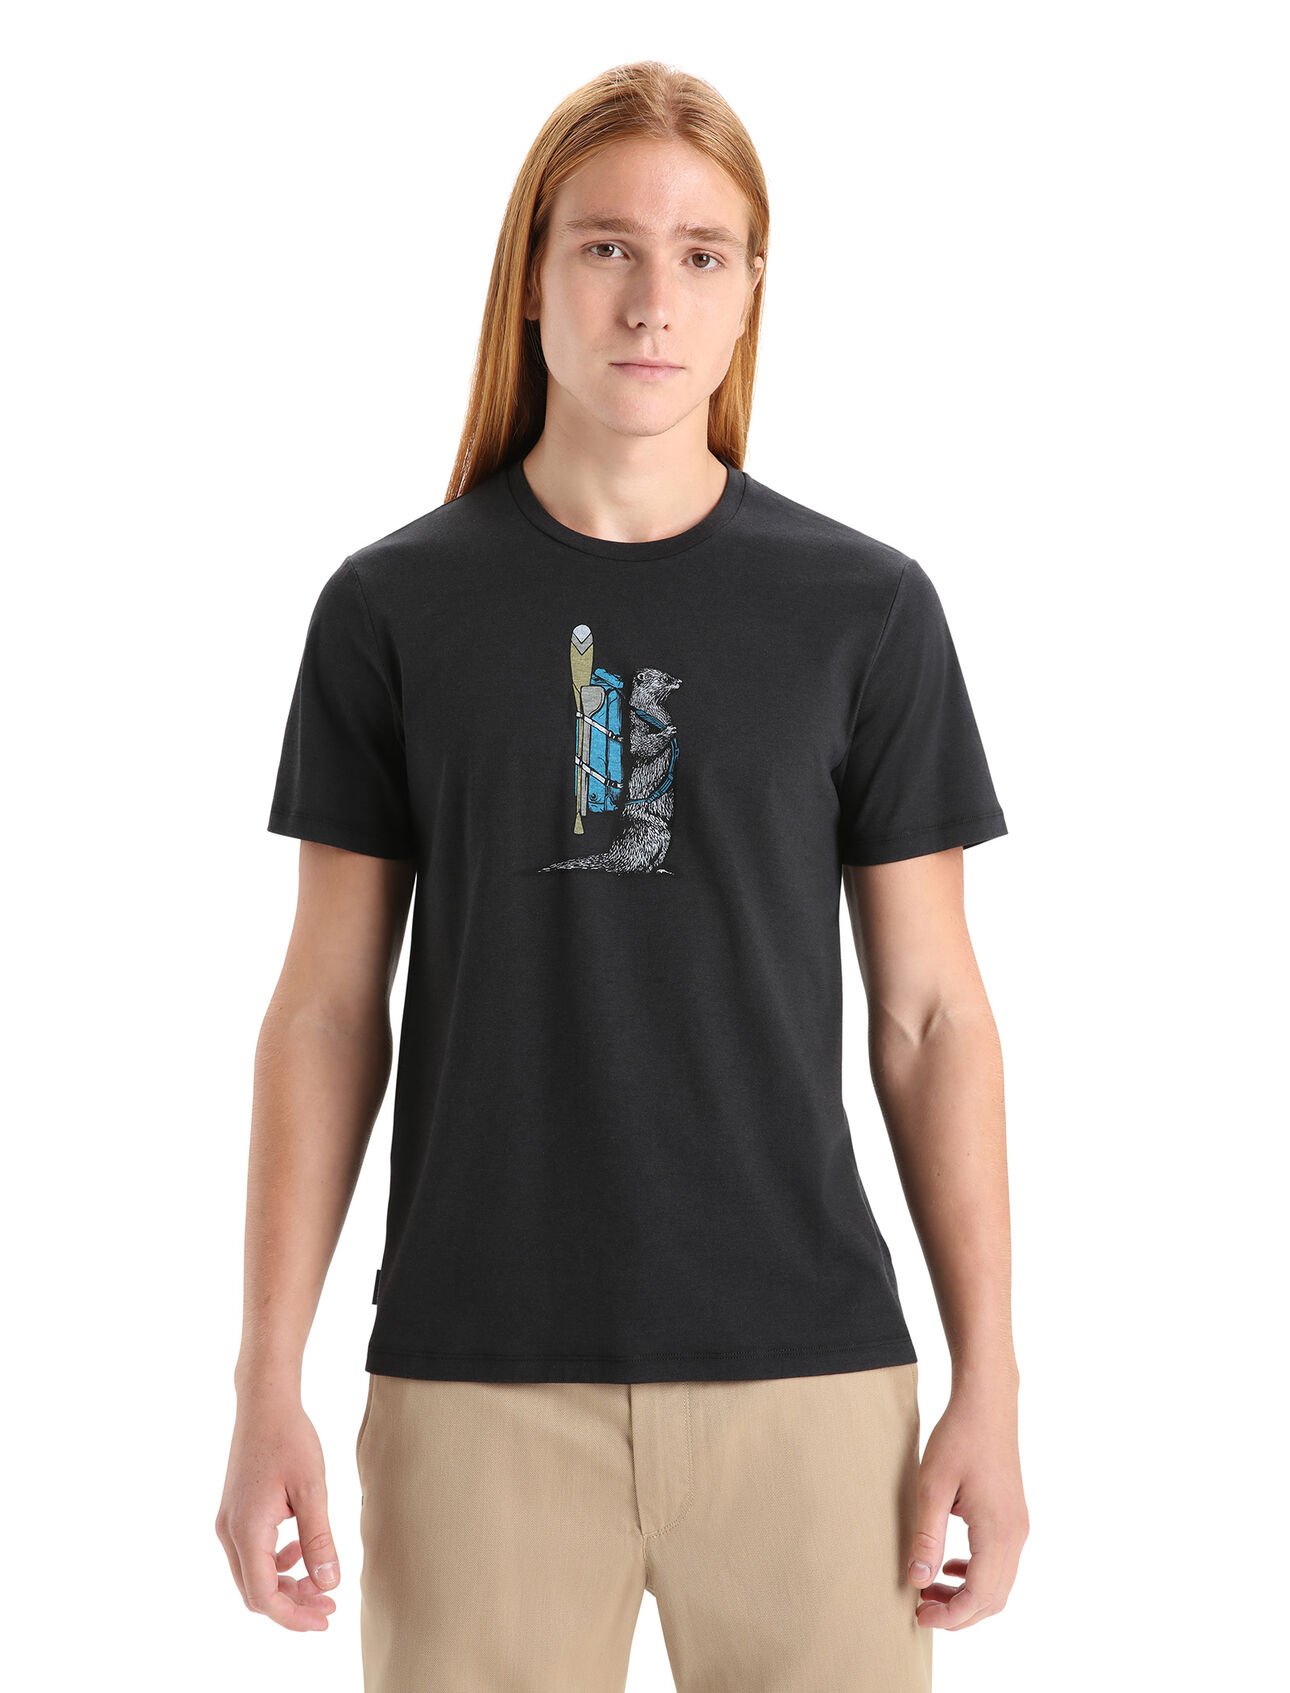 Mens Merino Central Classic Short Sleeve T-Shirt Otter Paddle A clean, classic and comfortable everyday tee that blends natural merino wool with organic cotton, the Central Classic Short Sleeve Tee Otter Paddle has you covered any day of the week.